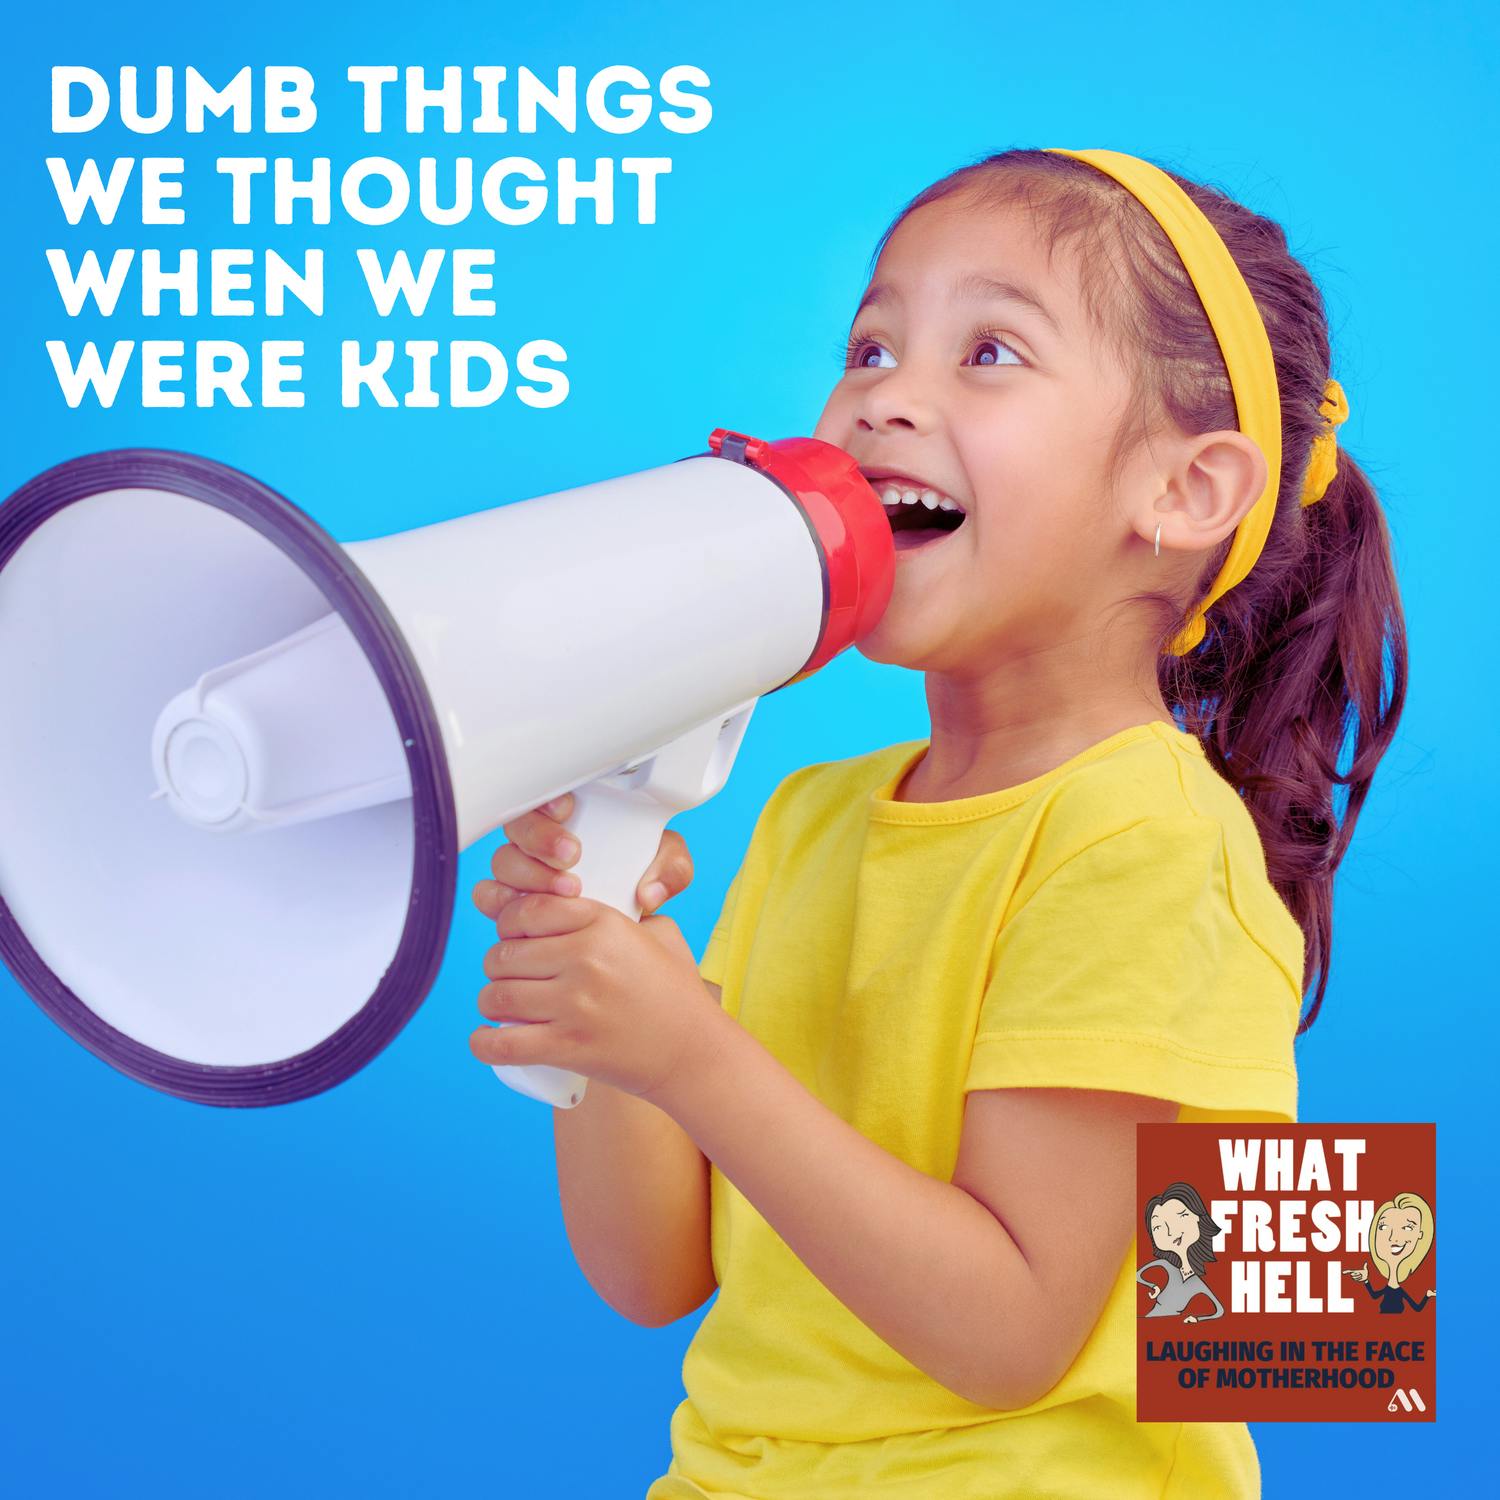 Dumb Things We Thought When We Were Kids